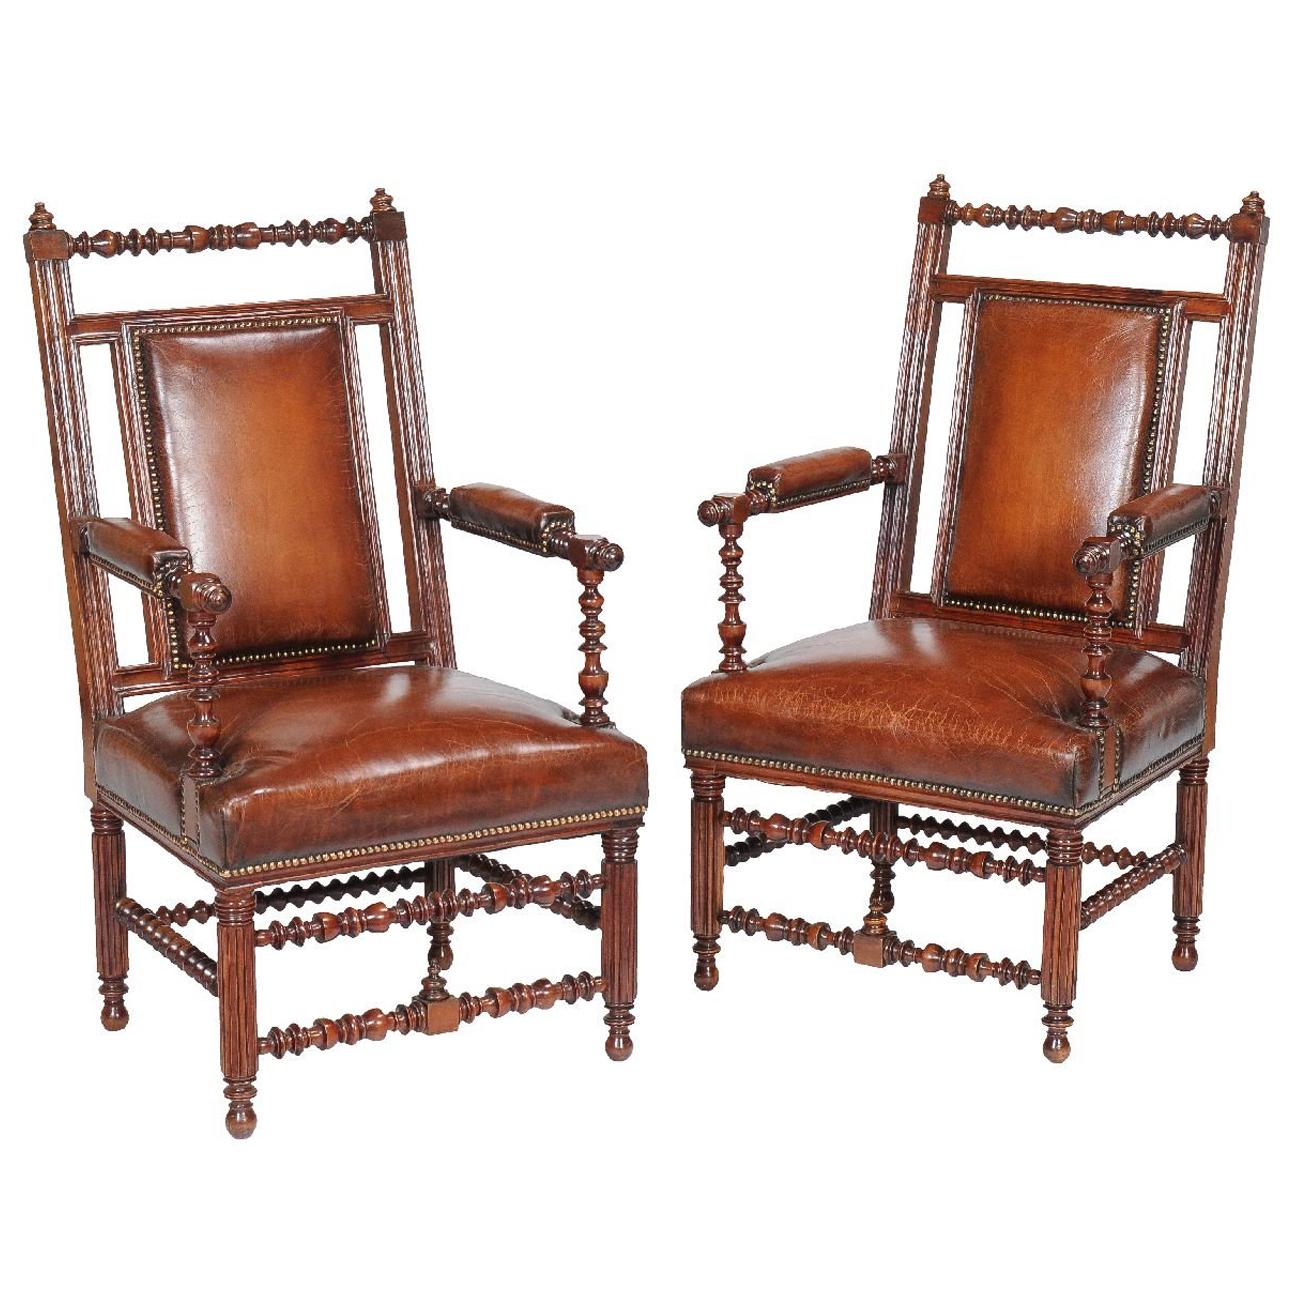 Pair of 19th Century English Victorian Gothic Revival Walnut Armchairs